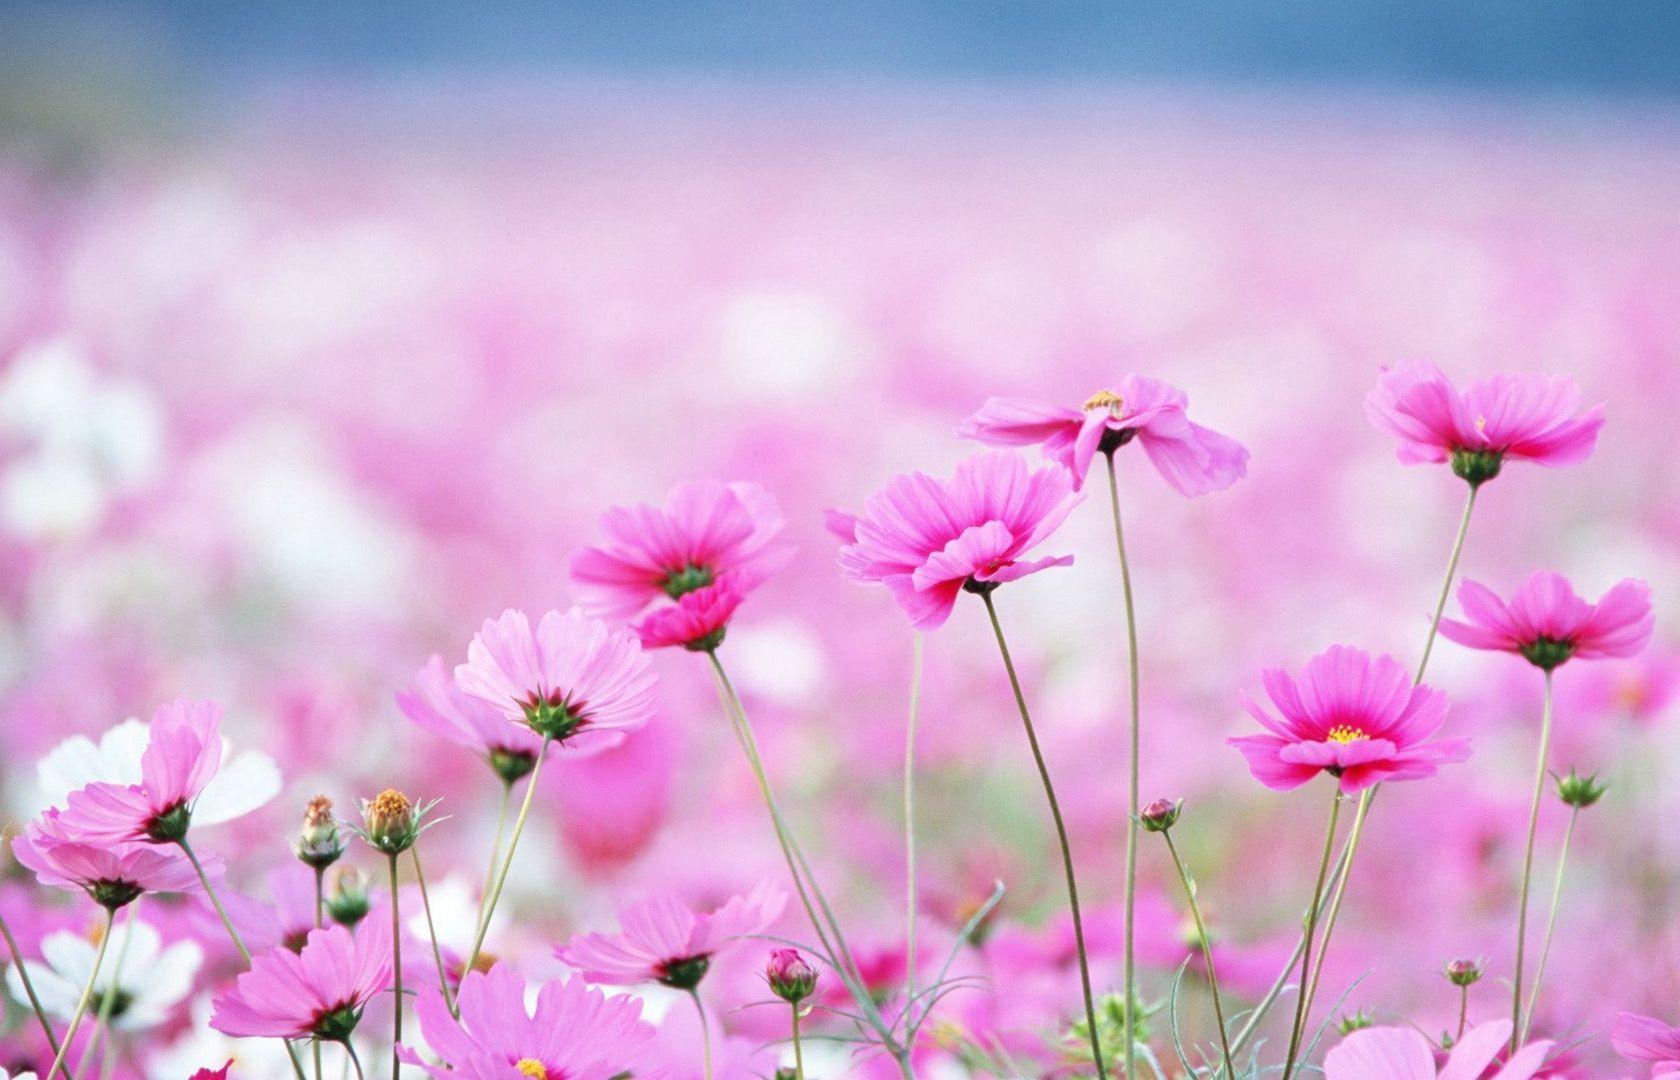 BEAUTIFUL FLOWER WALLPAPERS FREE TO DOWNLOAD. flowers